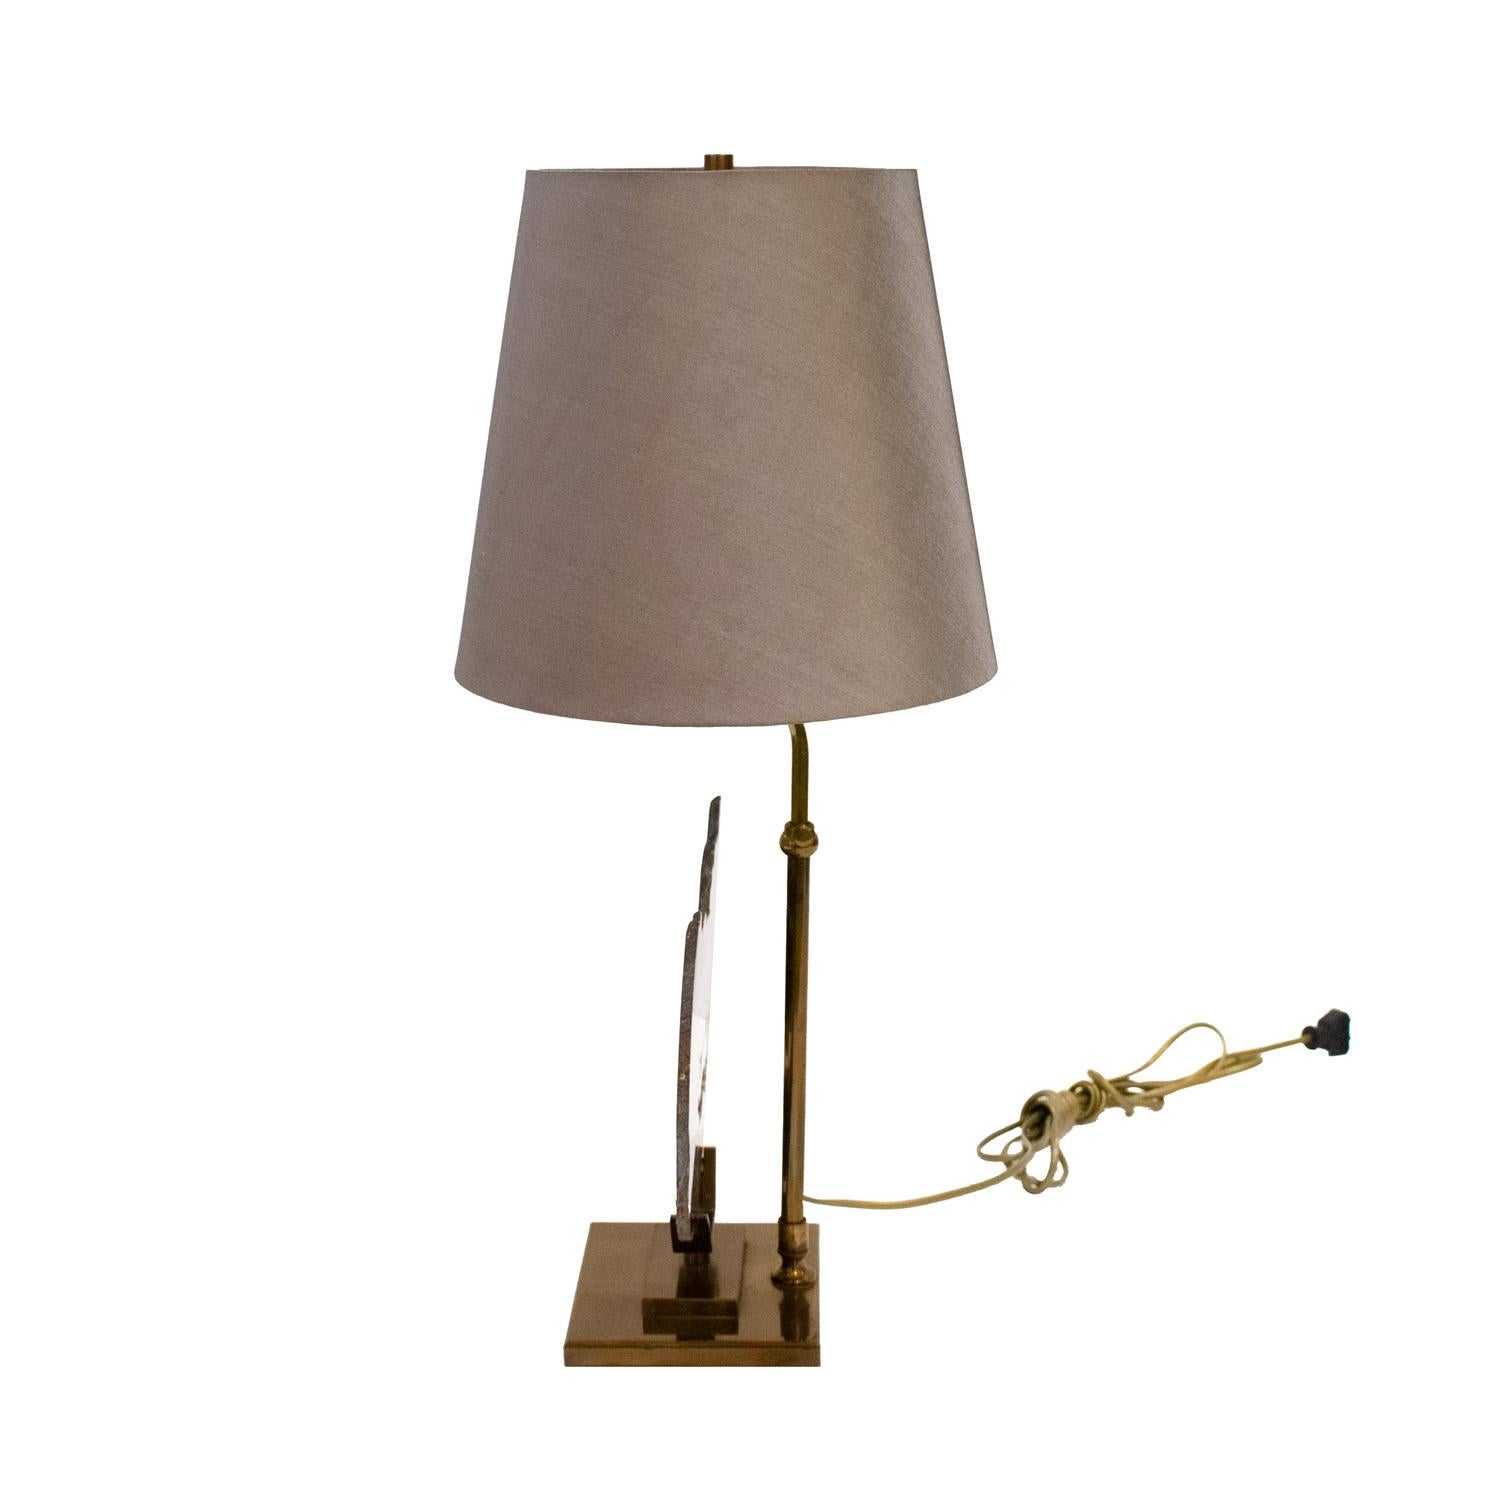 Hand-Crafted Exquisite Belgian Table Lamp with Mounted Agate 1970s For Sale